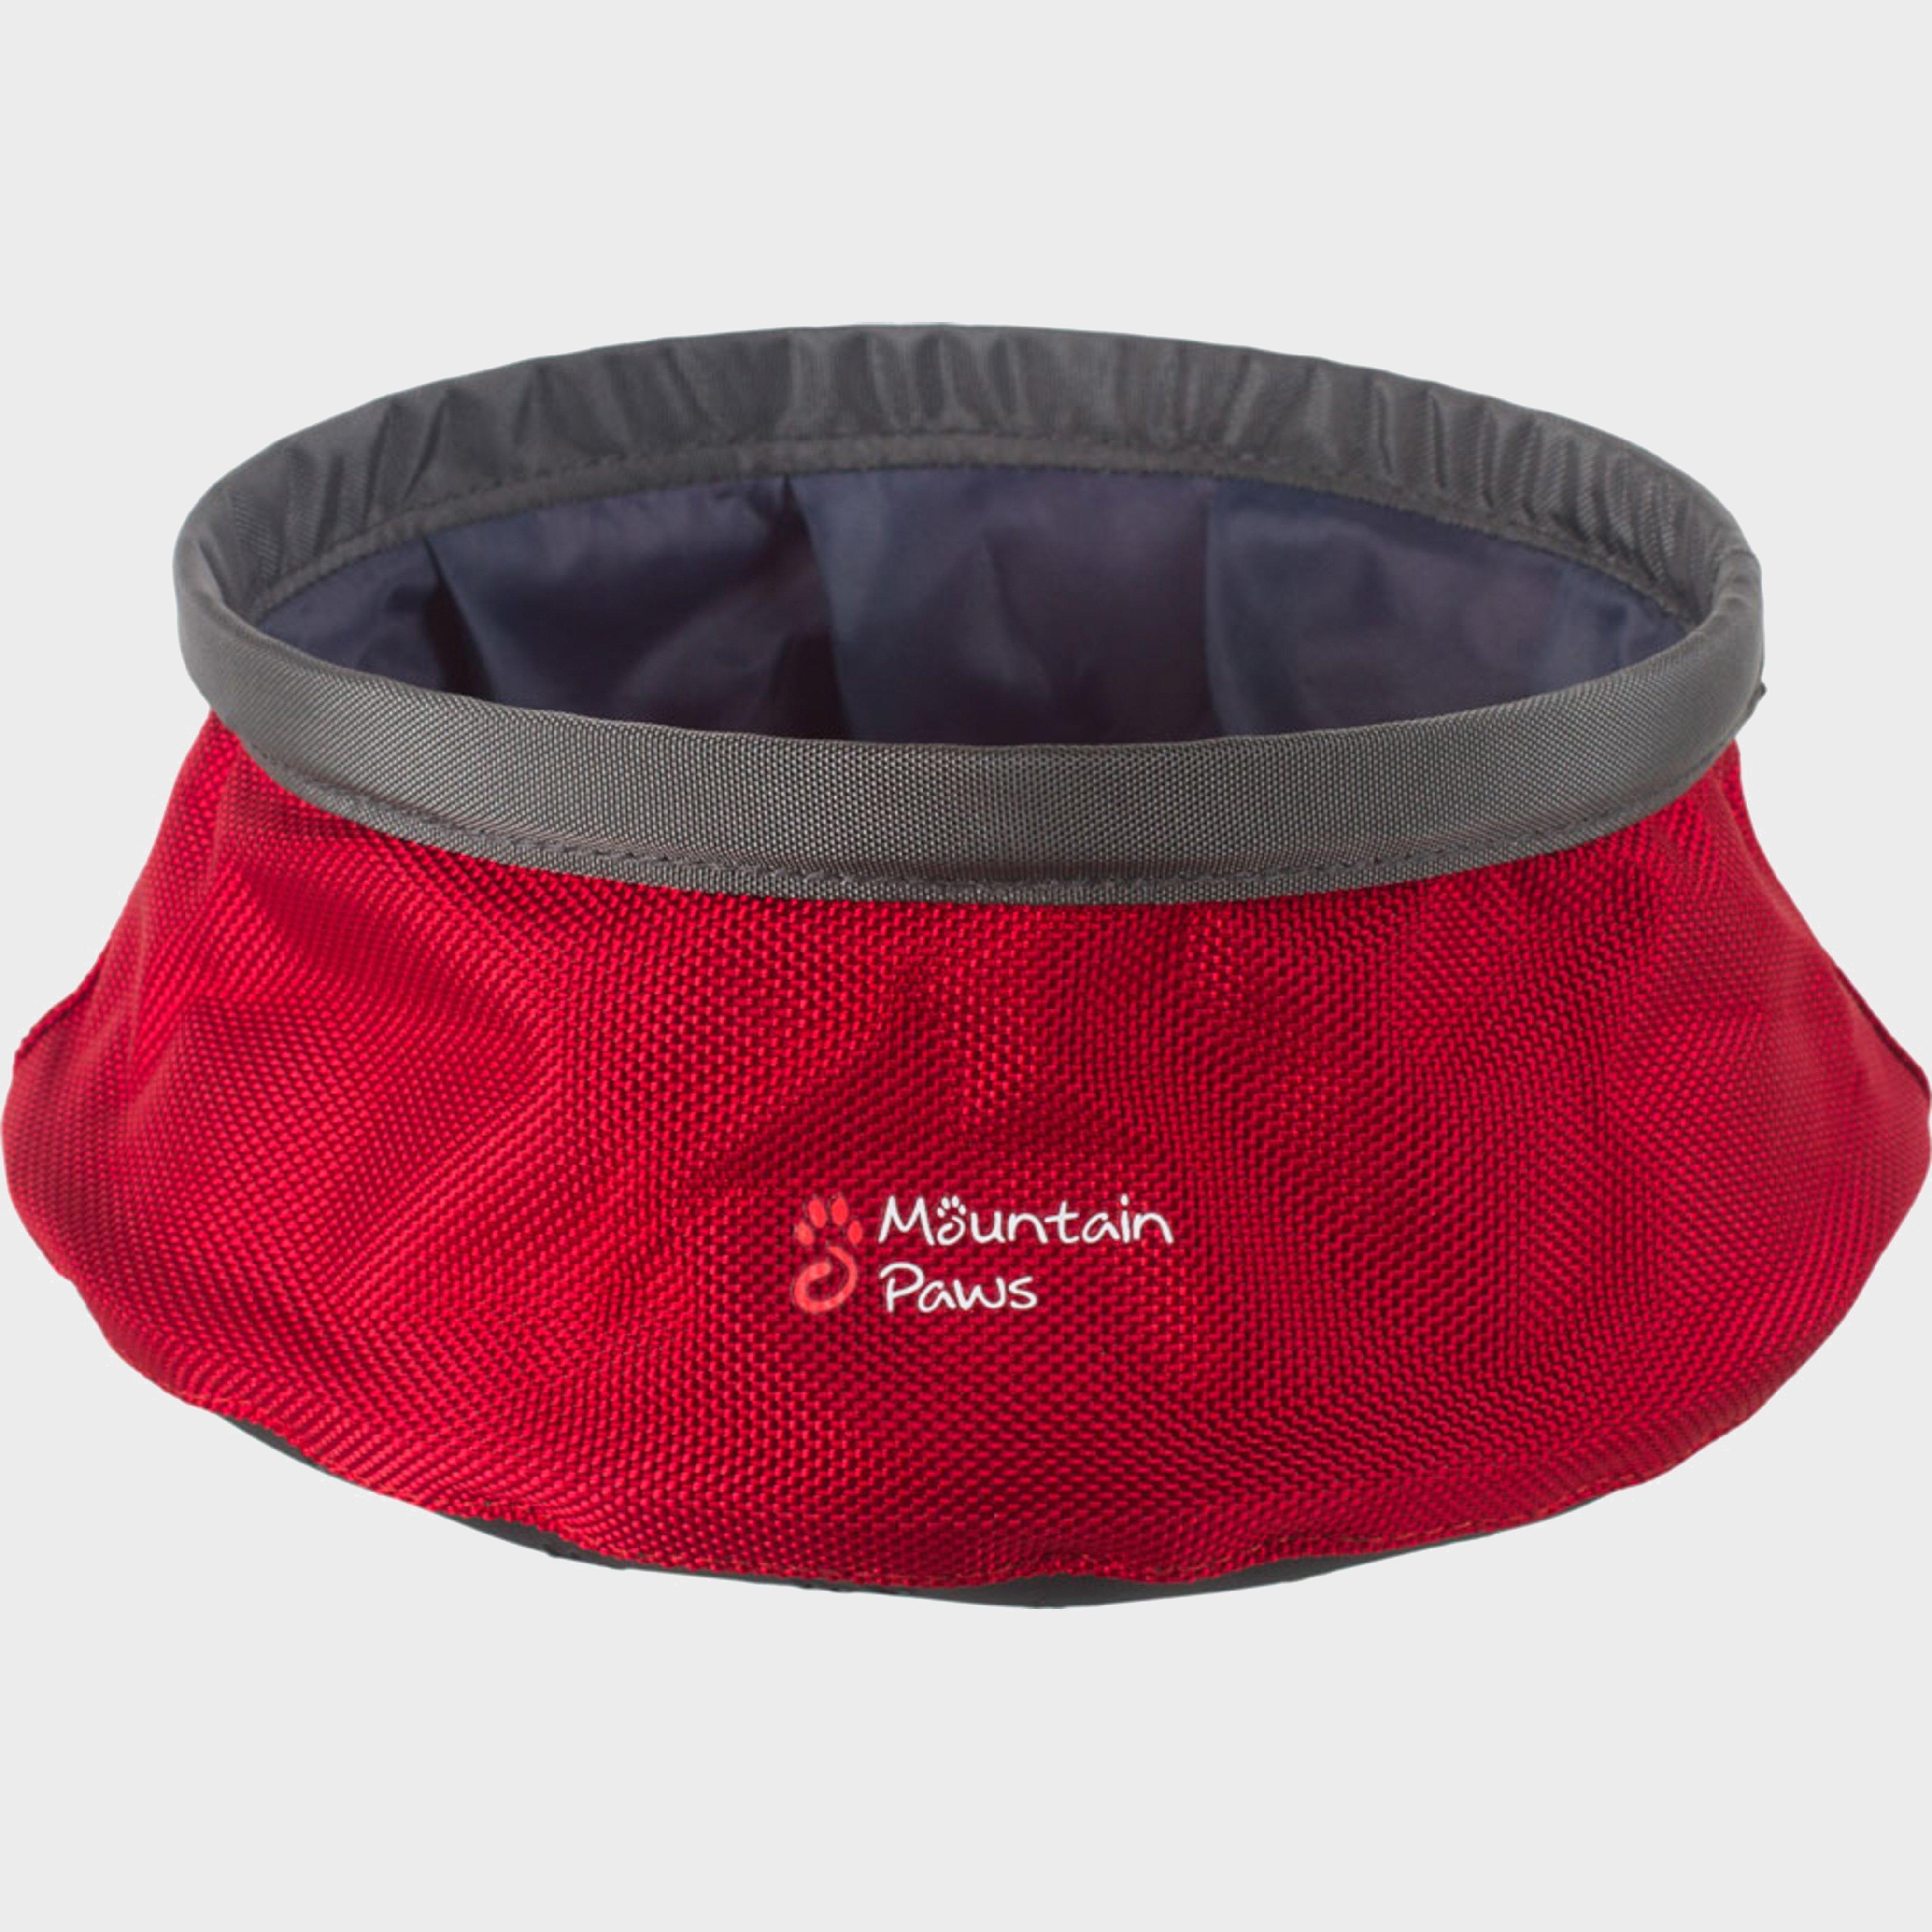 Image of Mountain Paws Water Bowl - Red/Lrg, Red/LRG